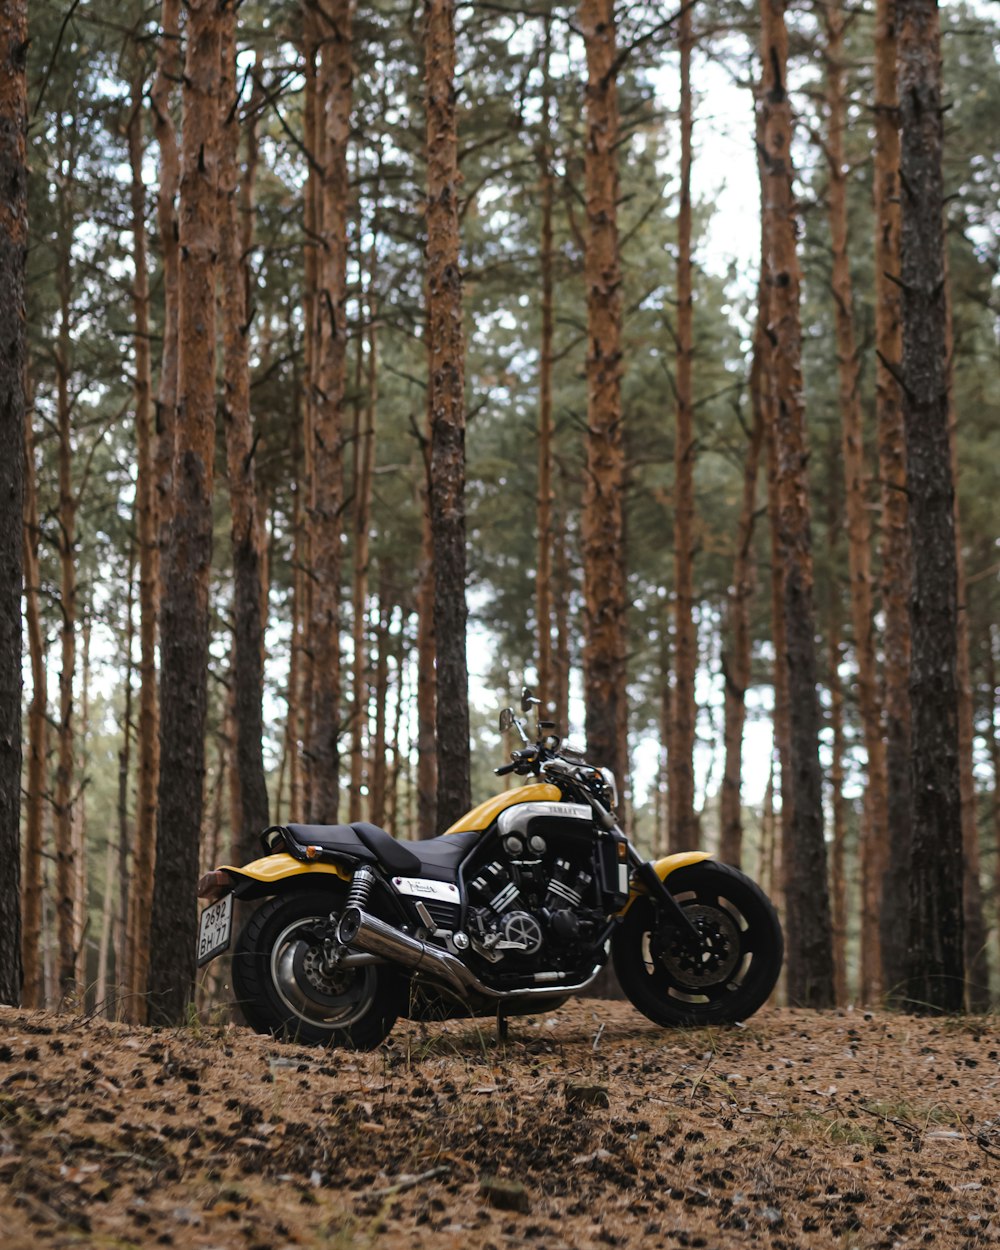 yellow and black cruiser motorcycle surrounded by trees